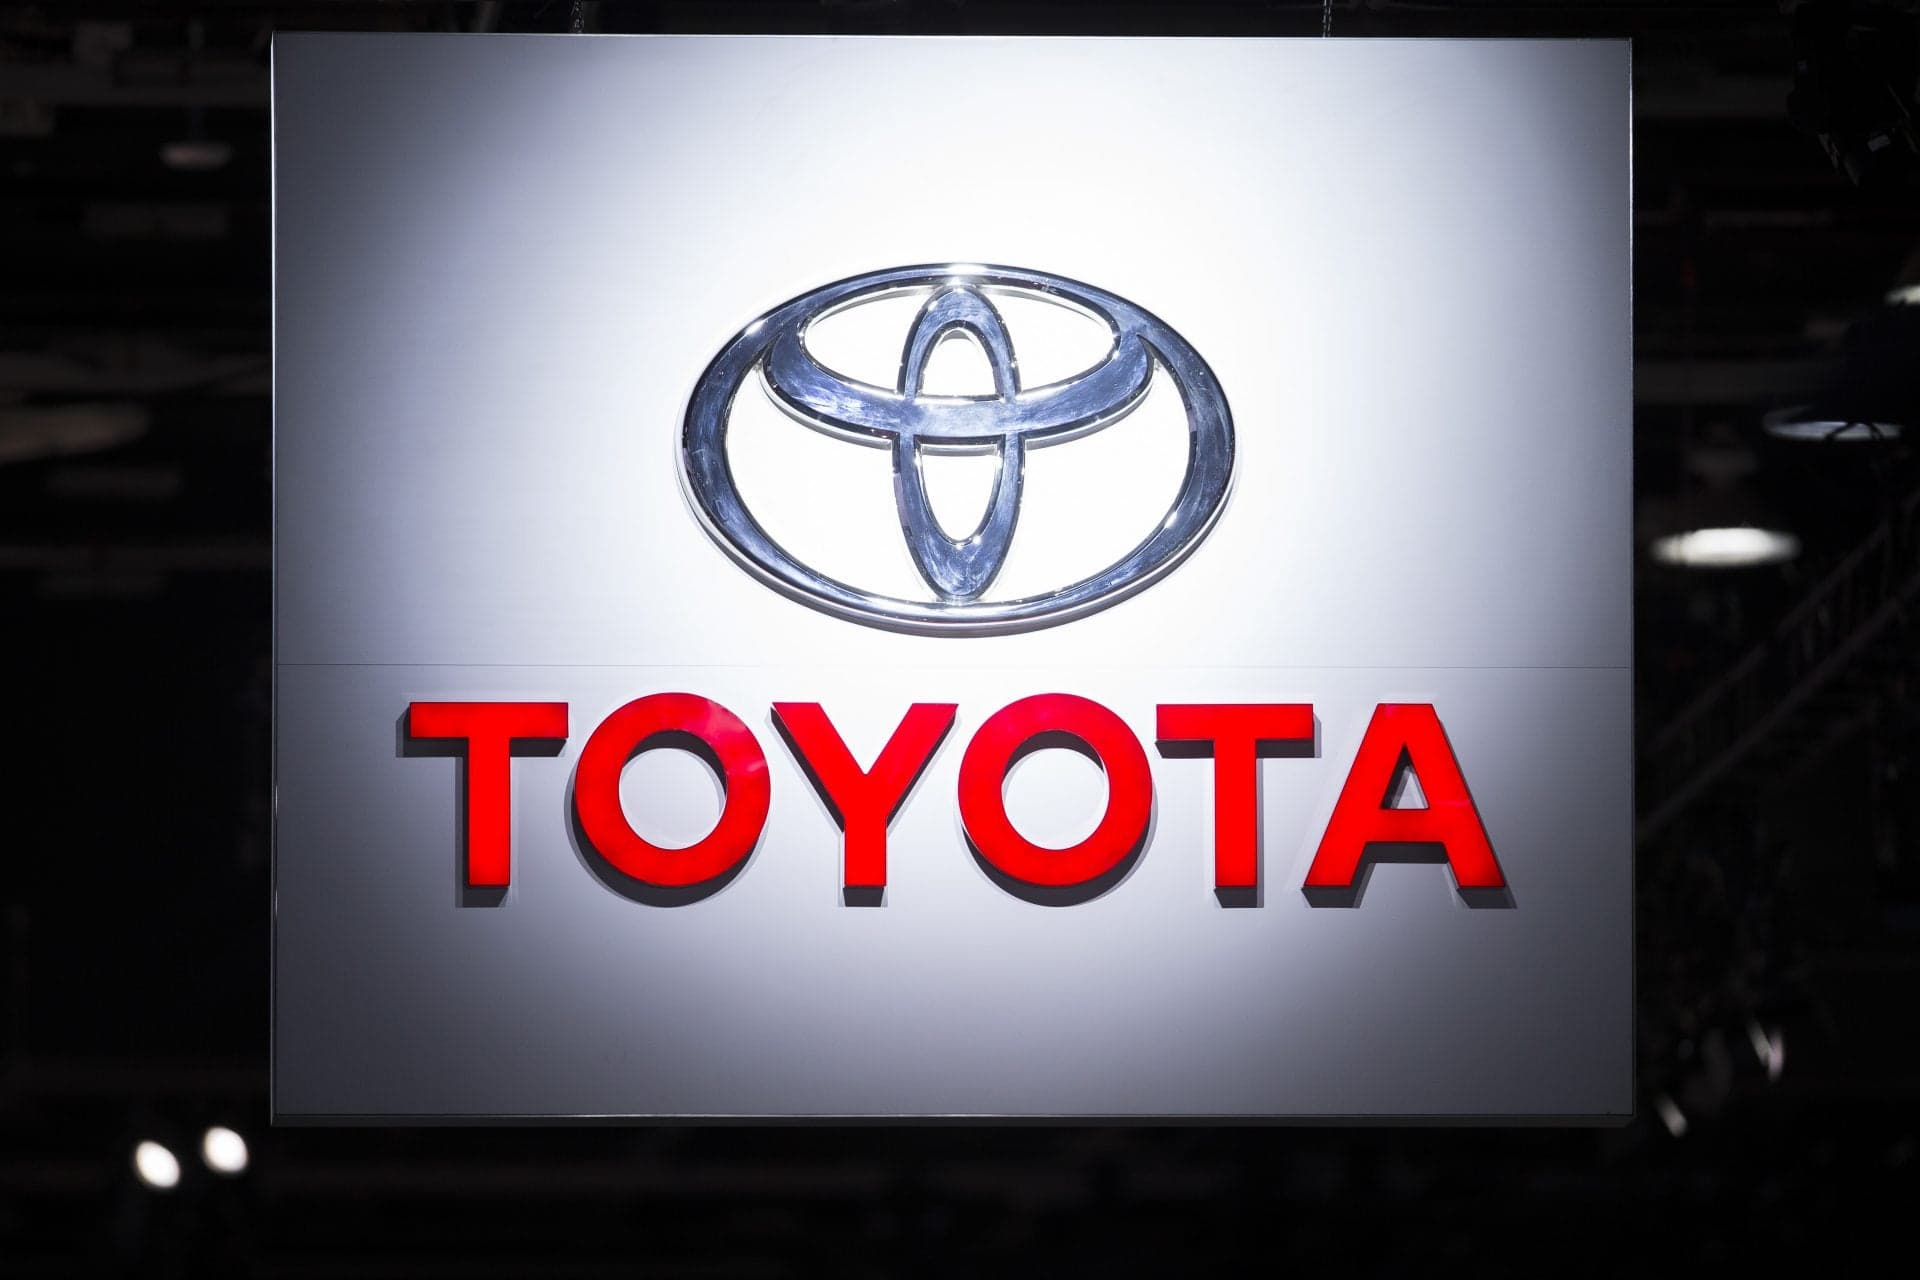 Toyota Mobility Contest Will Give $1M Prize to Top Innovations for Disabled People